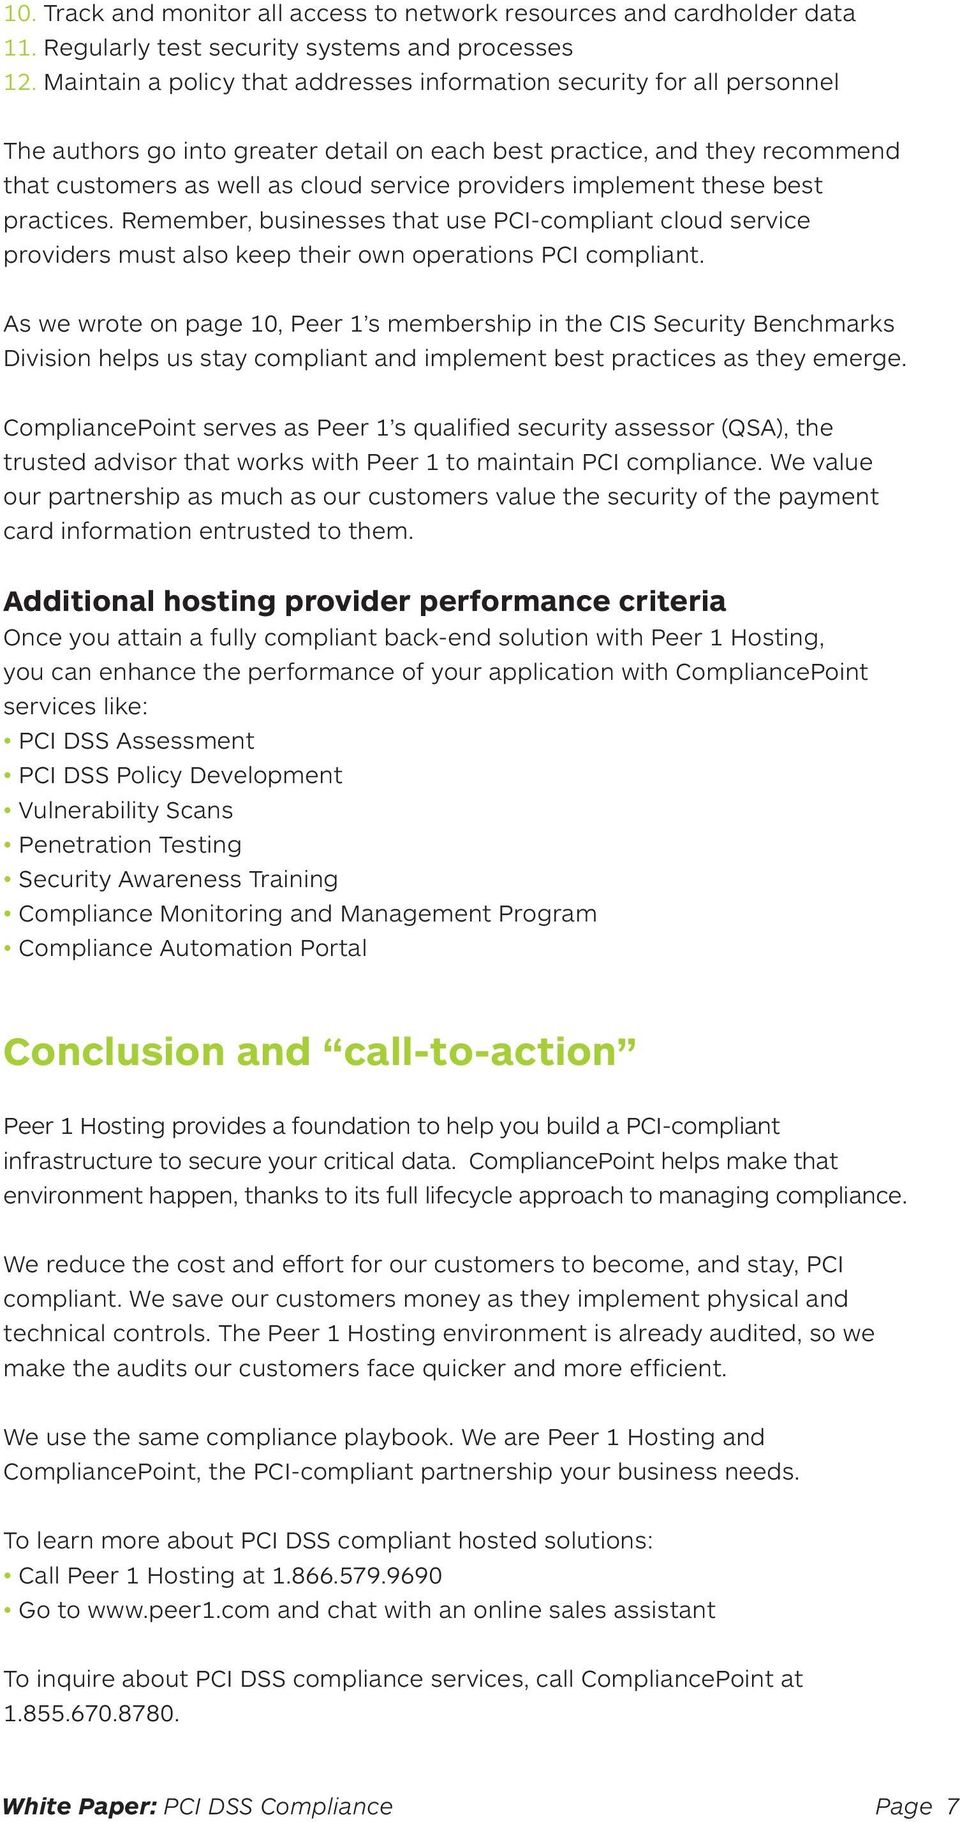 implement these best practices. Remember, businesses that use PCI-compliant cloud service providers must also keep their own operations PCI compliant.